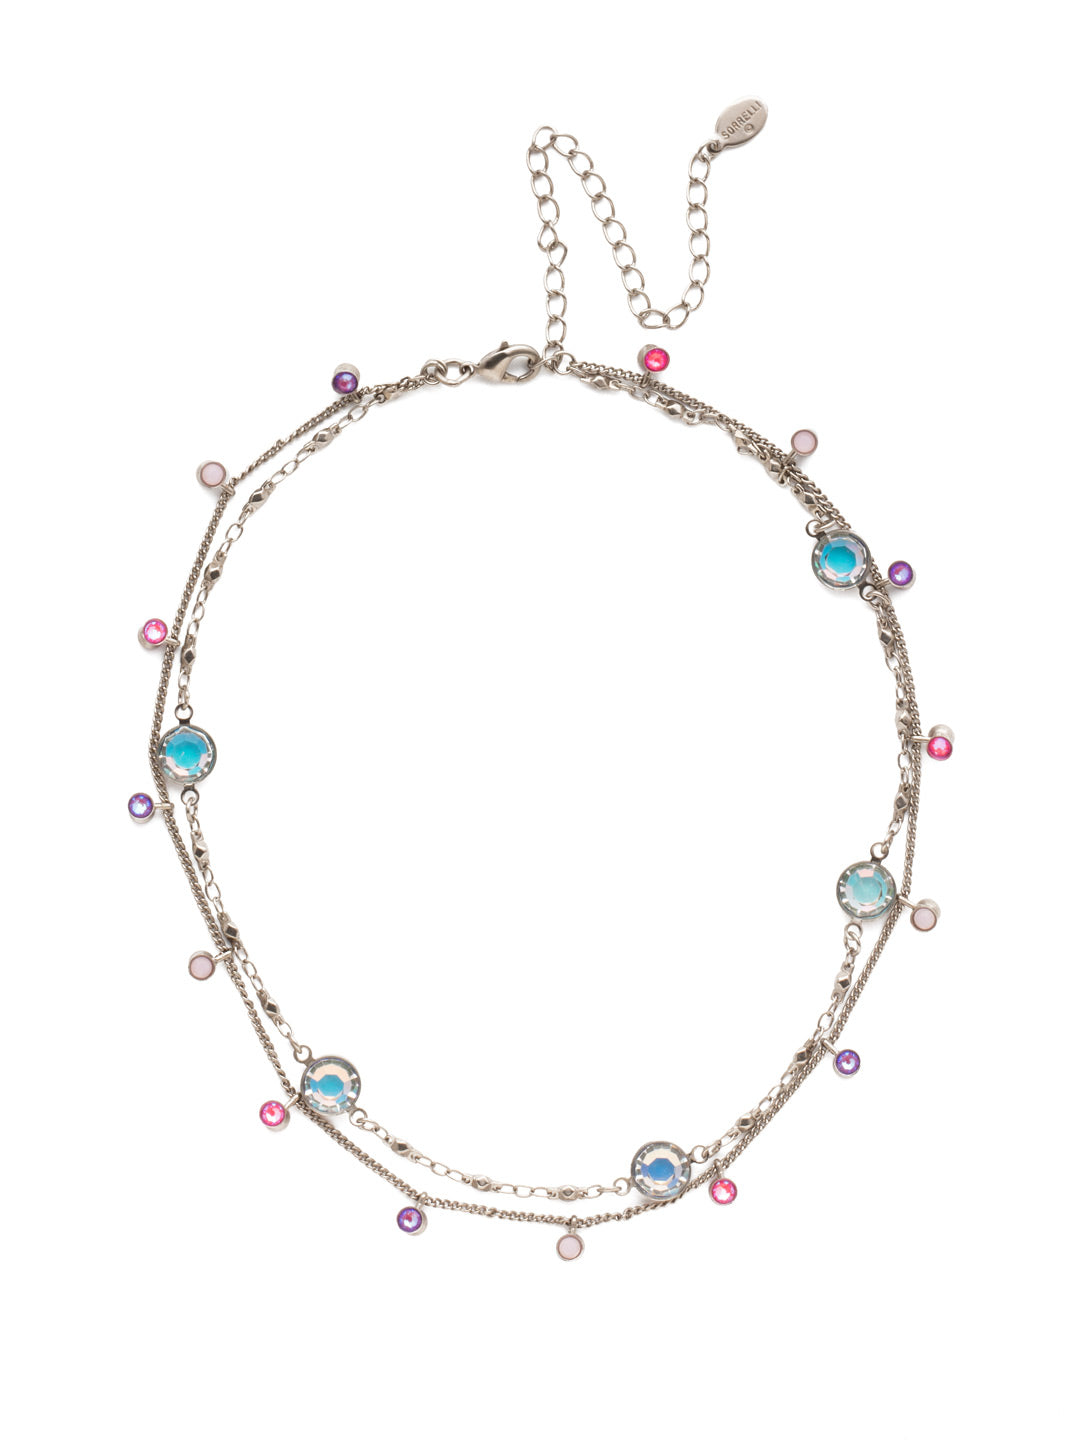 Dewdrop Layered Necklace - NEK36ASETP - Delicate layers of chain drizzled with droplets of opaque crystals. A quick and easy solution for a layered look with one piece. From Sorrelli's Electric Pink collection in our Antique Silver-tone finish.